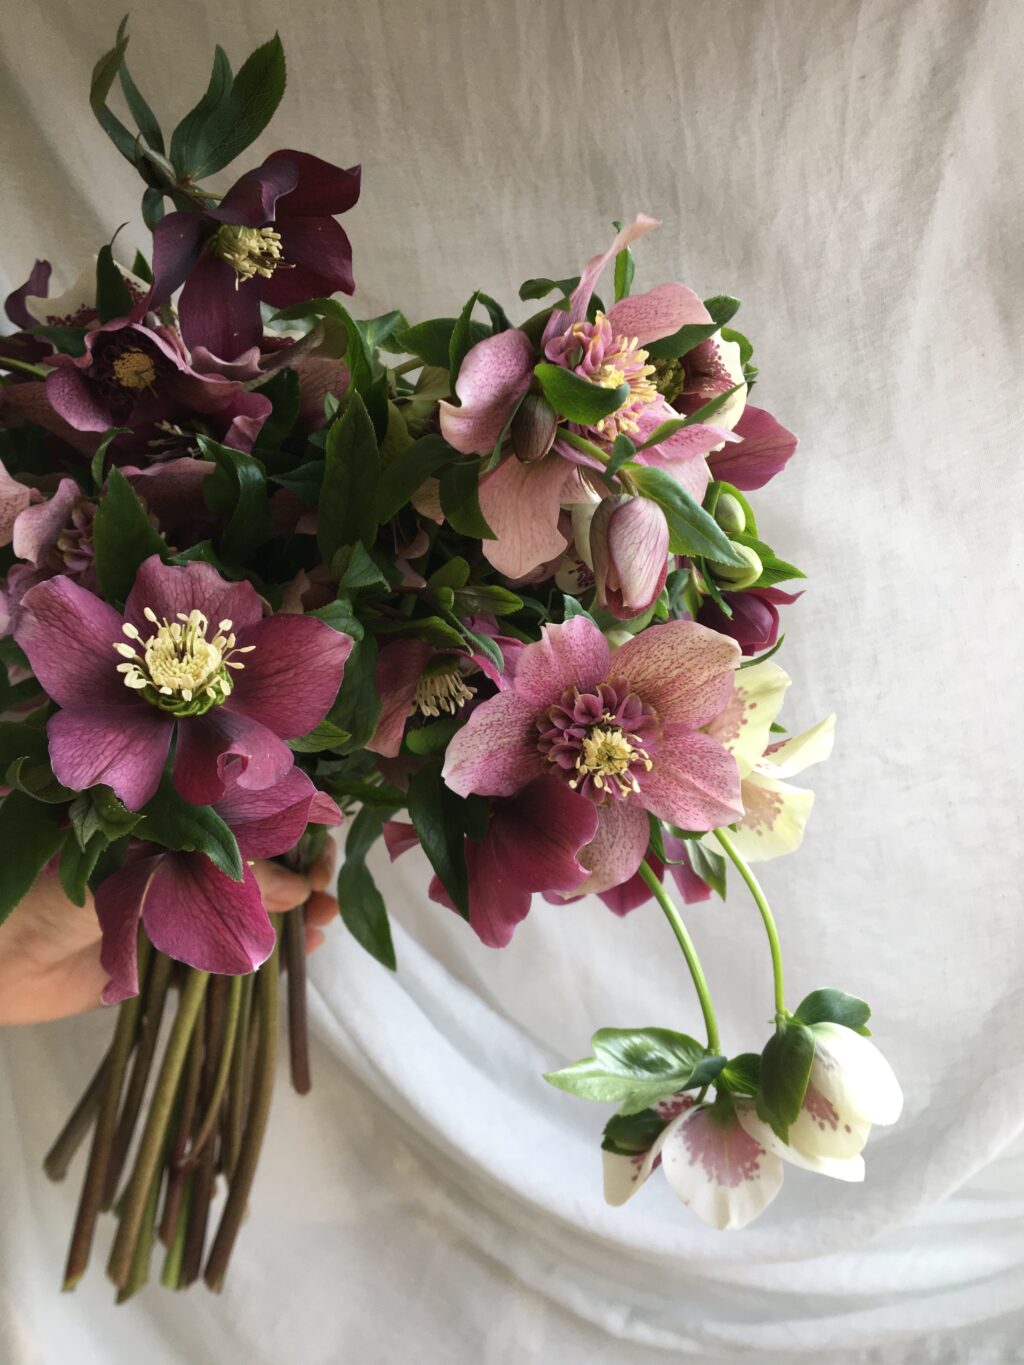 Dark and moody hellebores reveal their beautiful stamens held aloft in a simple bunch by Lois of Little Garden Flowers.